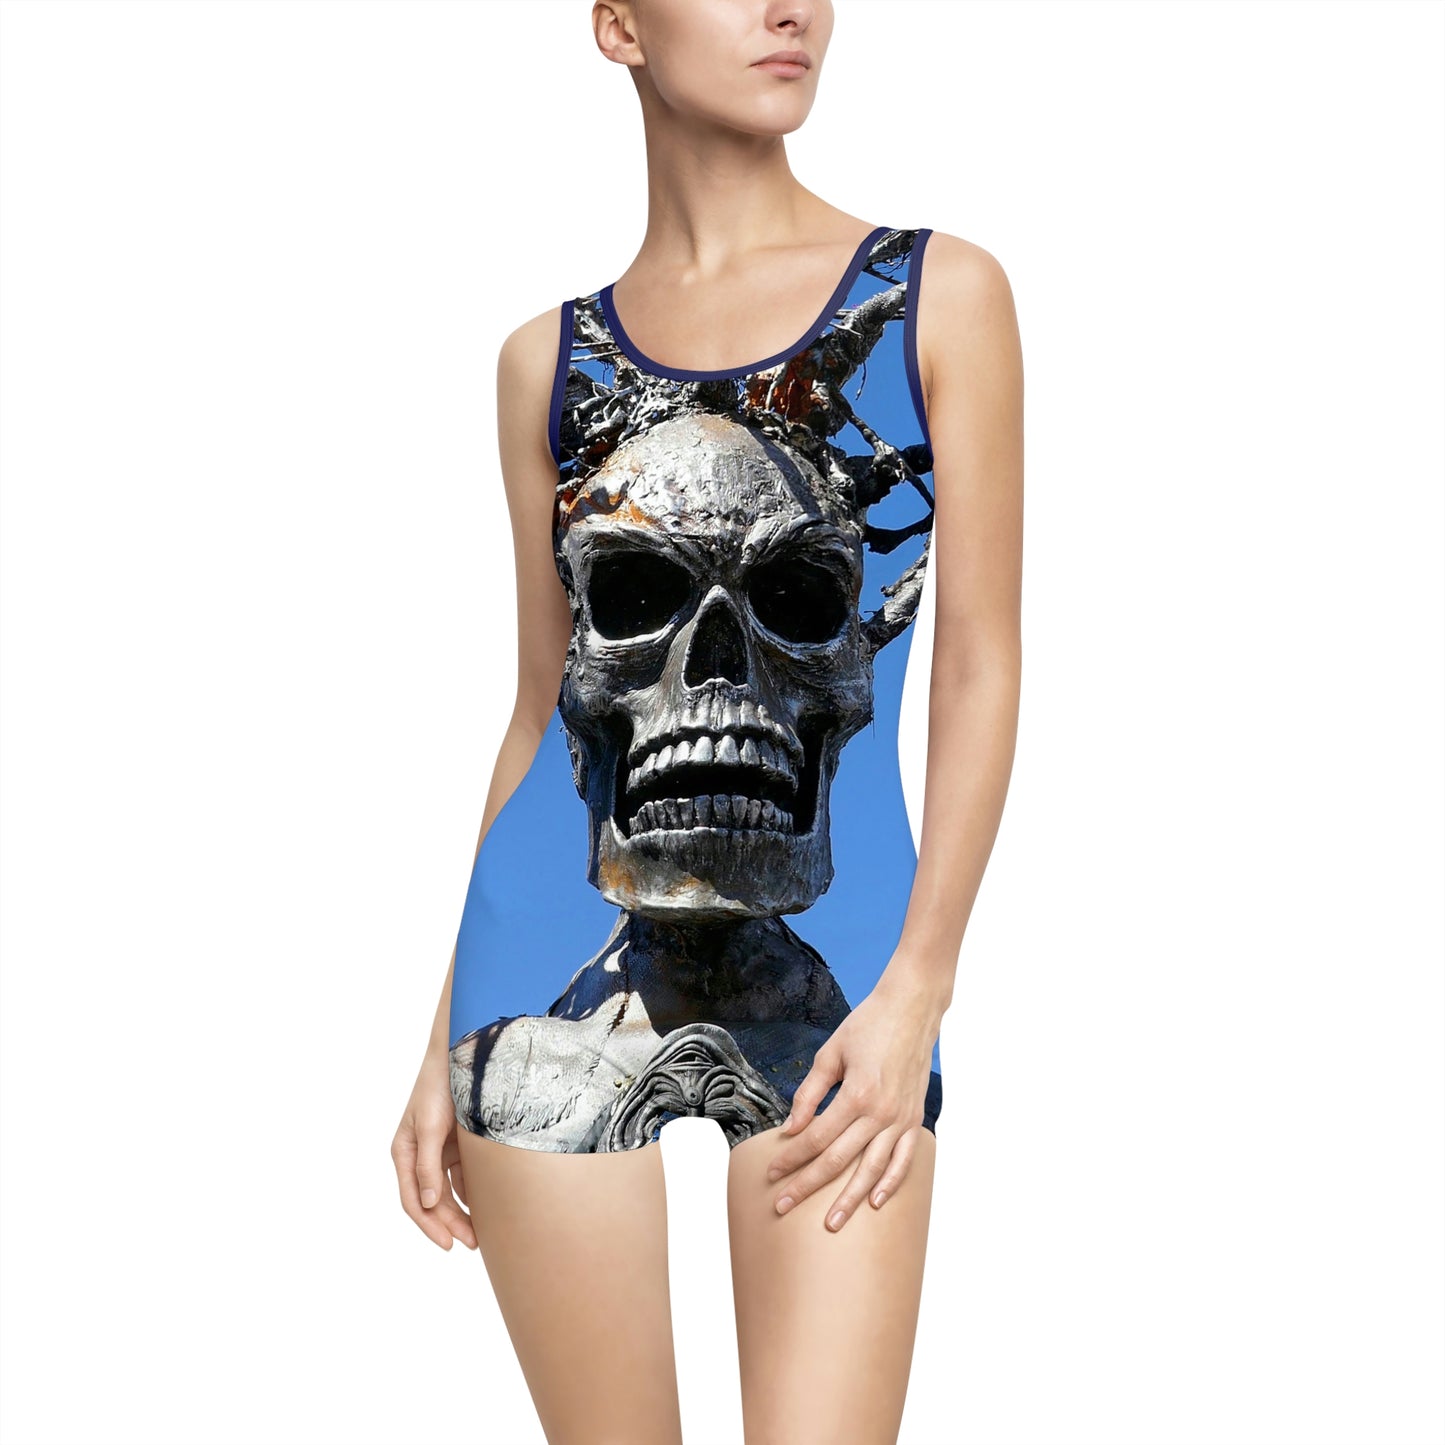 Skull Warrior Stare - Women's Vintage Swimsuit - Fry1Productions